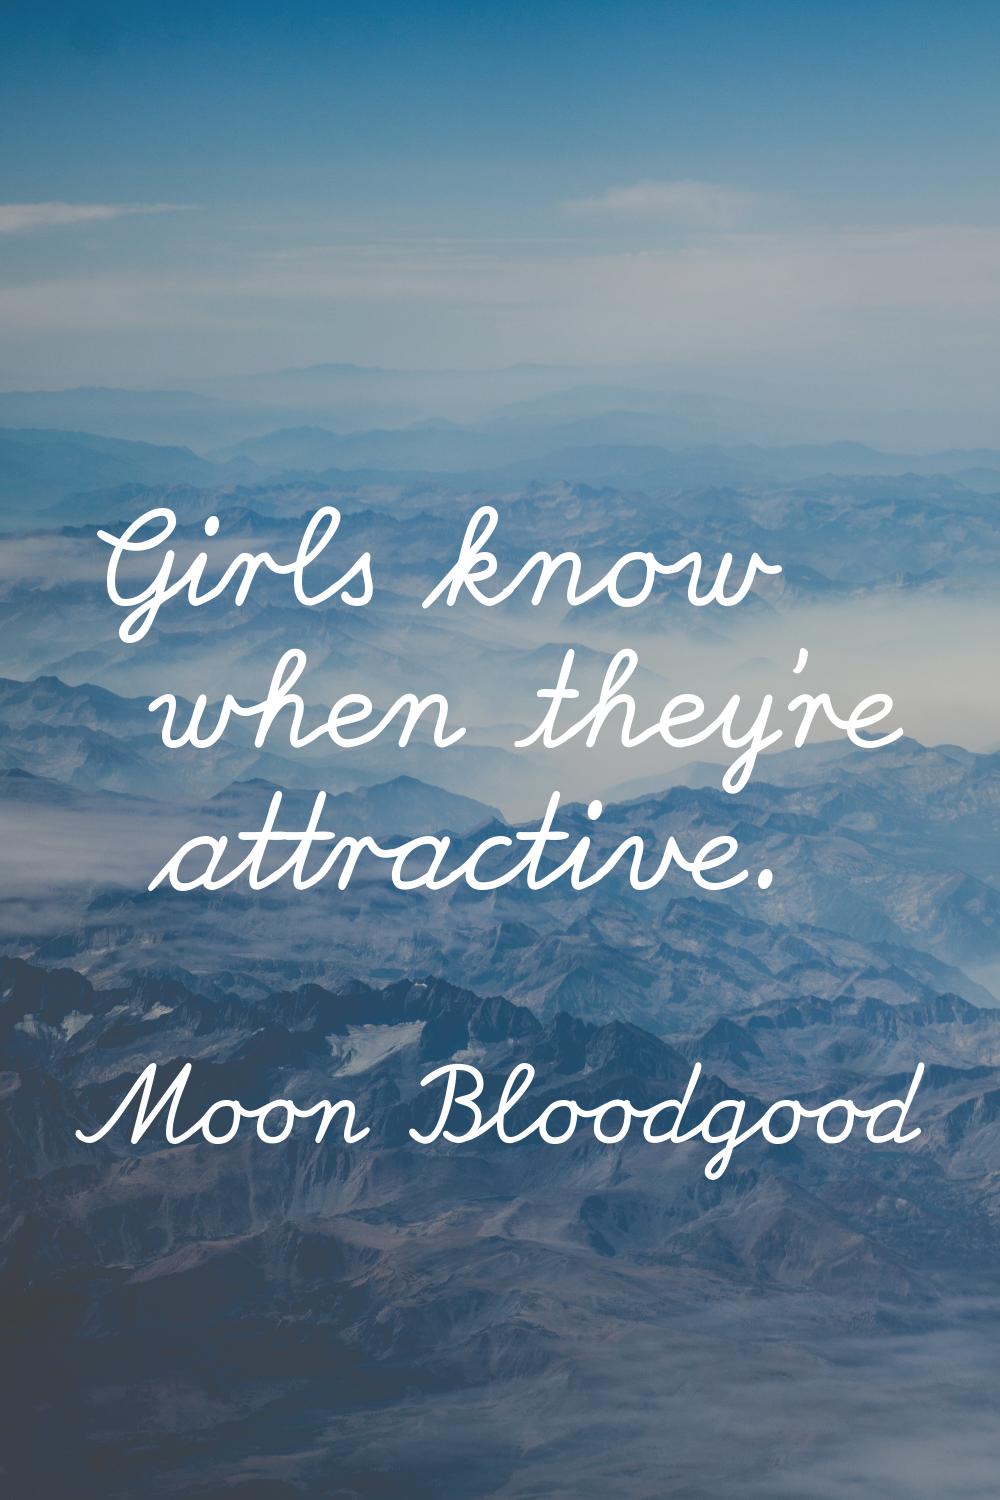 Girls know when they're attractive.